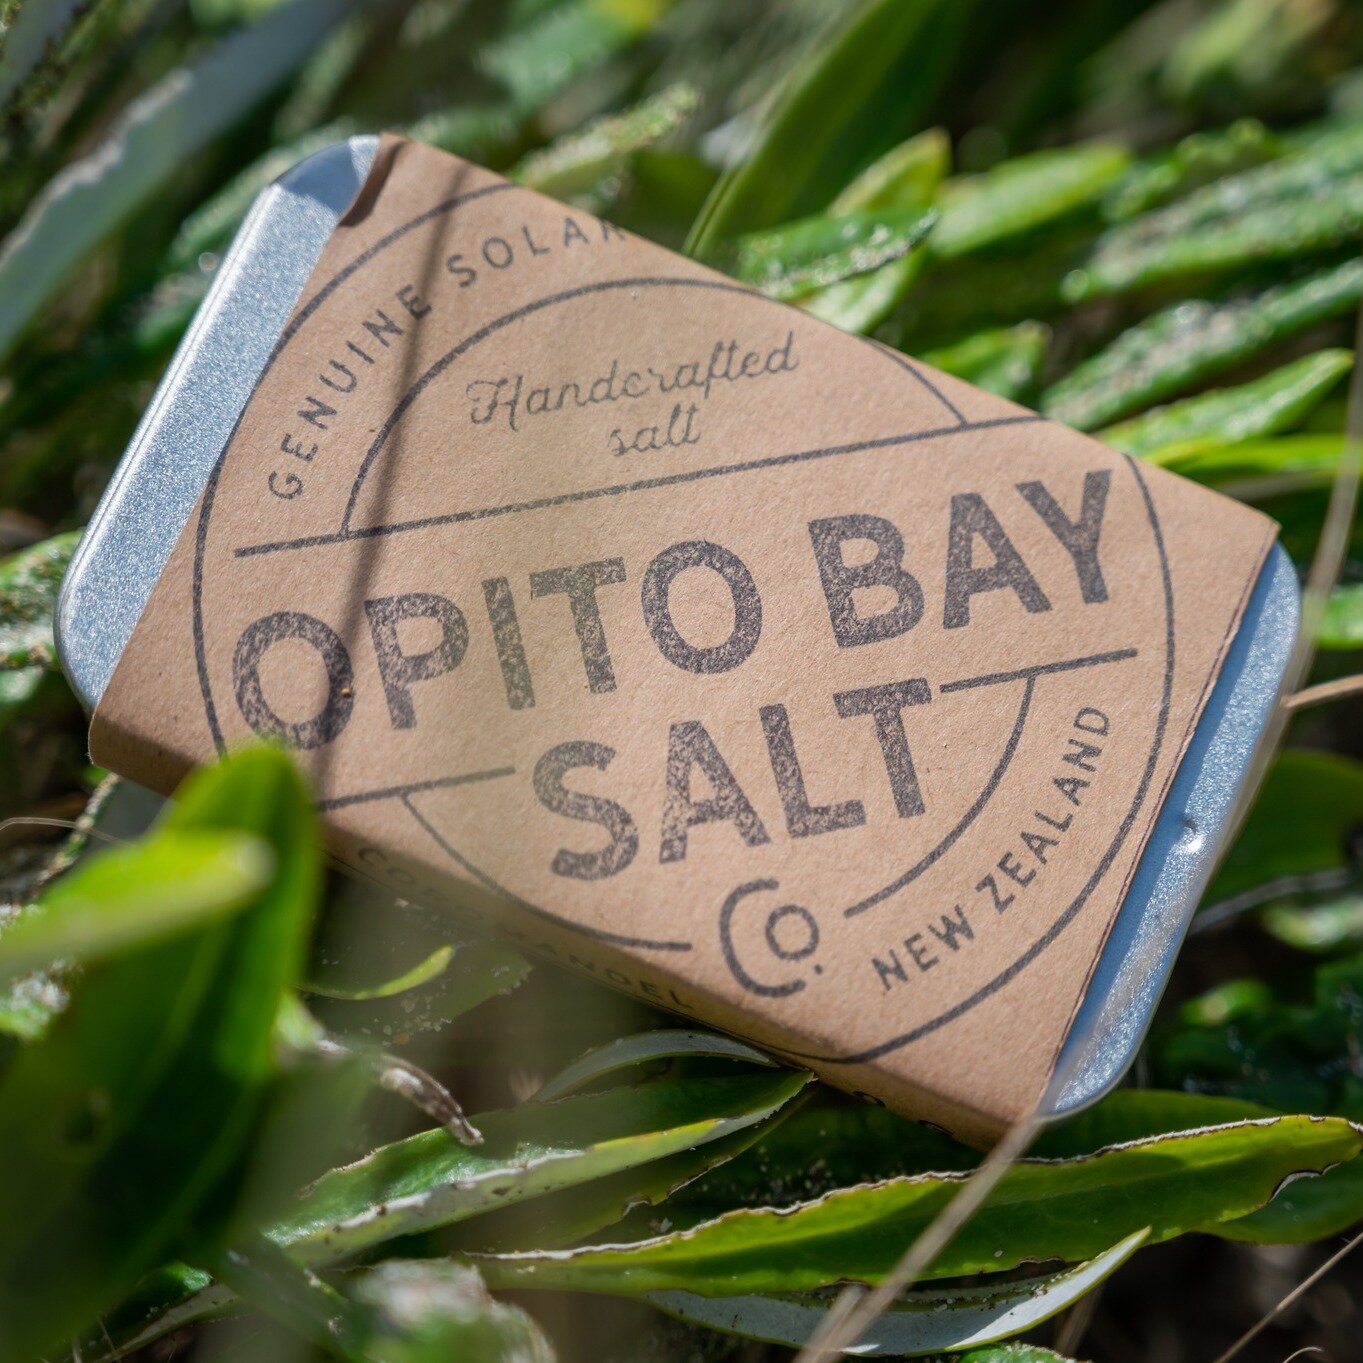 It's called the &quot;Take me Anywhere&quot; tin. If you're heading to the beach this Easter don't forget to order your Opito Bay sea salt...or seasoning.

We'll be at a bunch of Coromandel markets over Easter so its a good opportunity to try some of